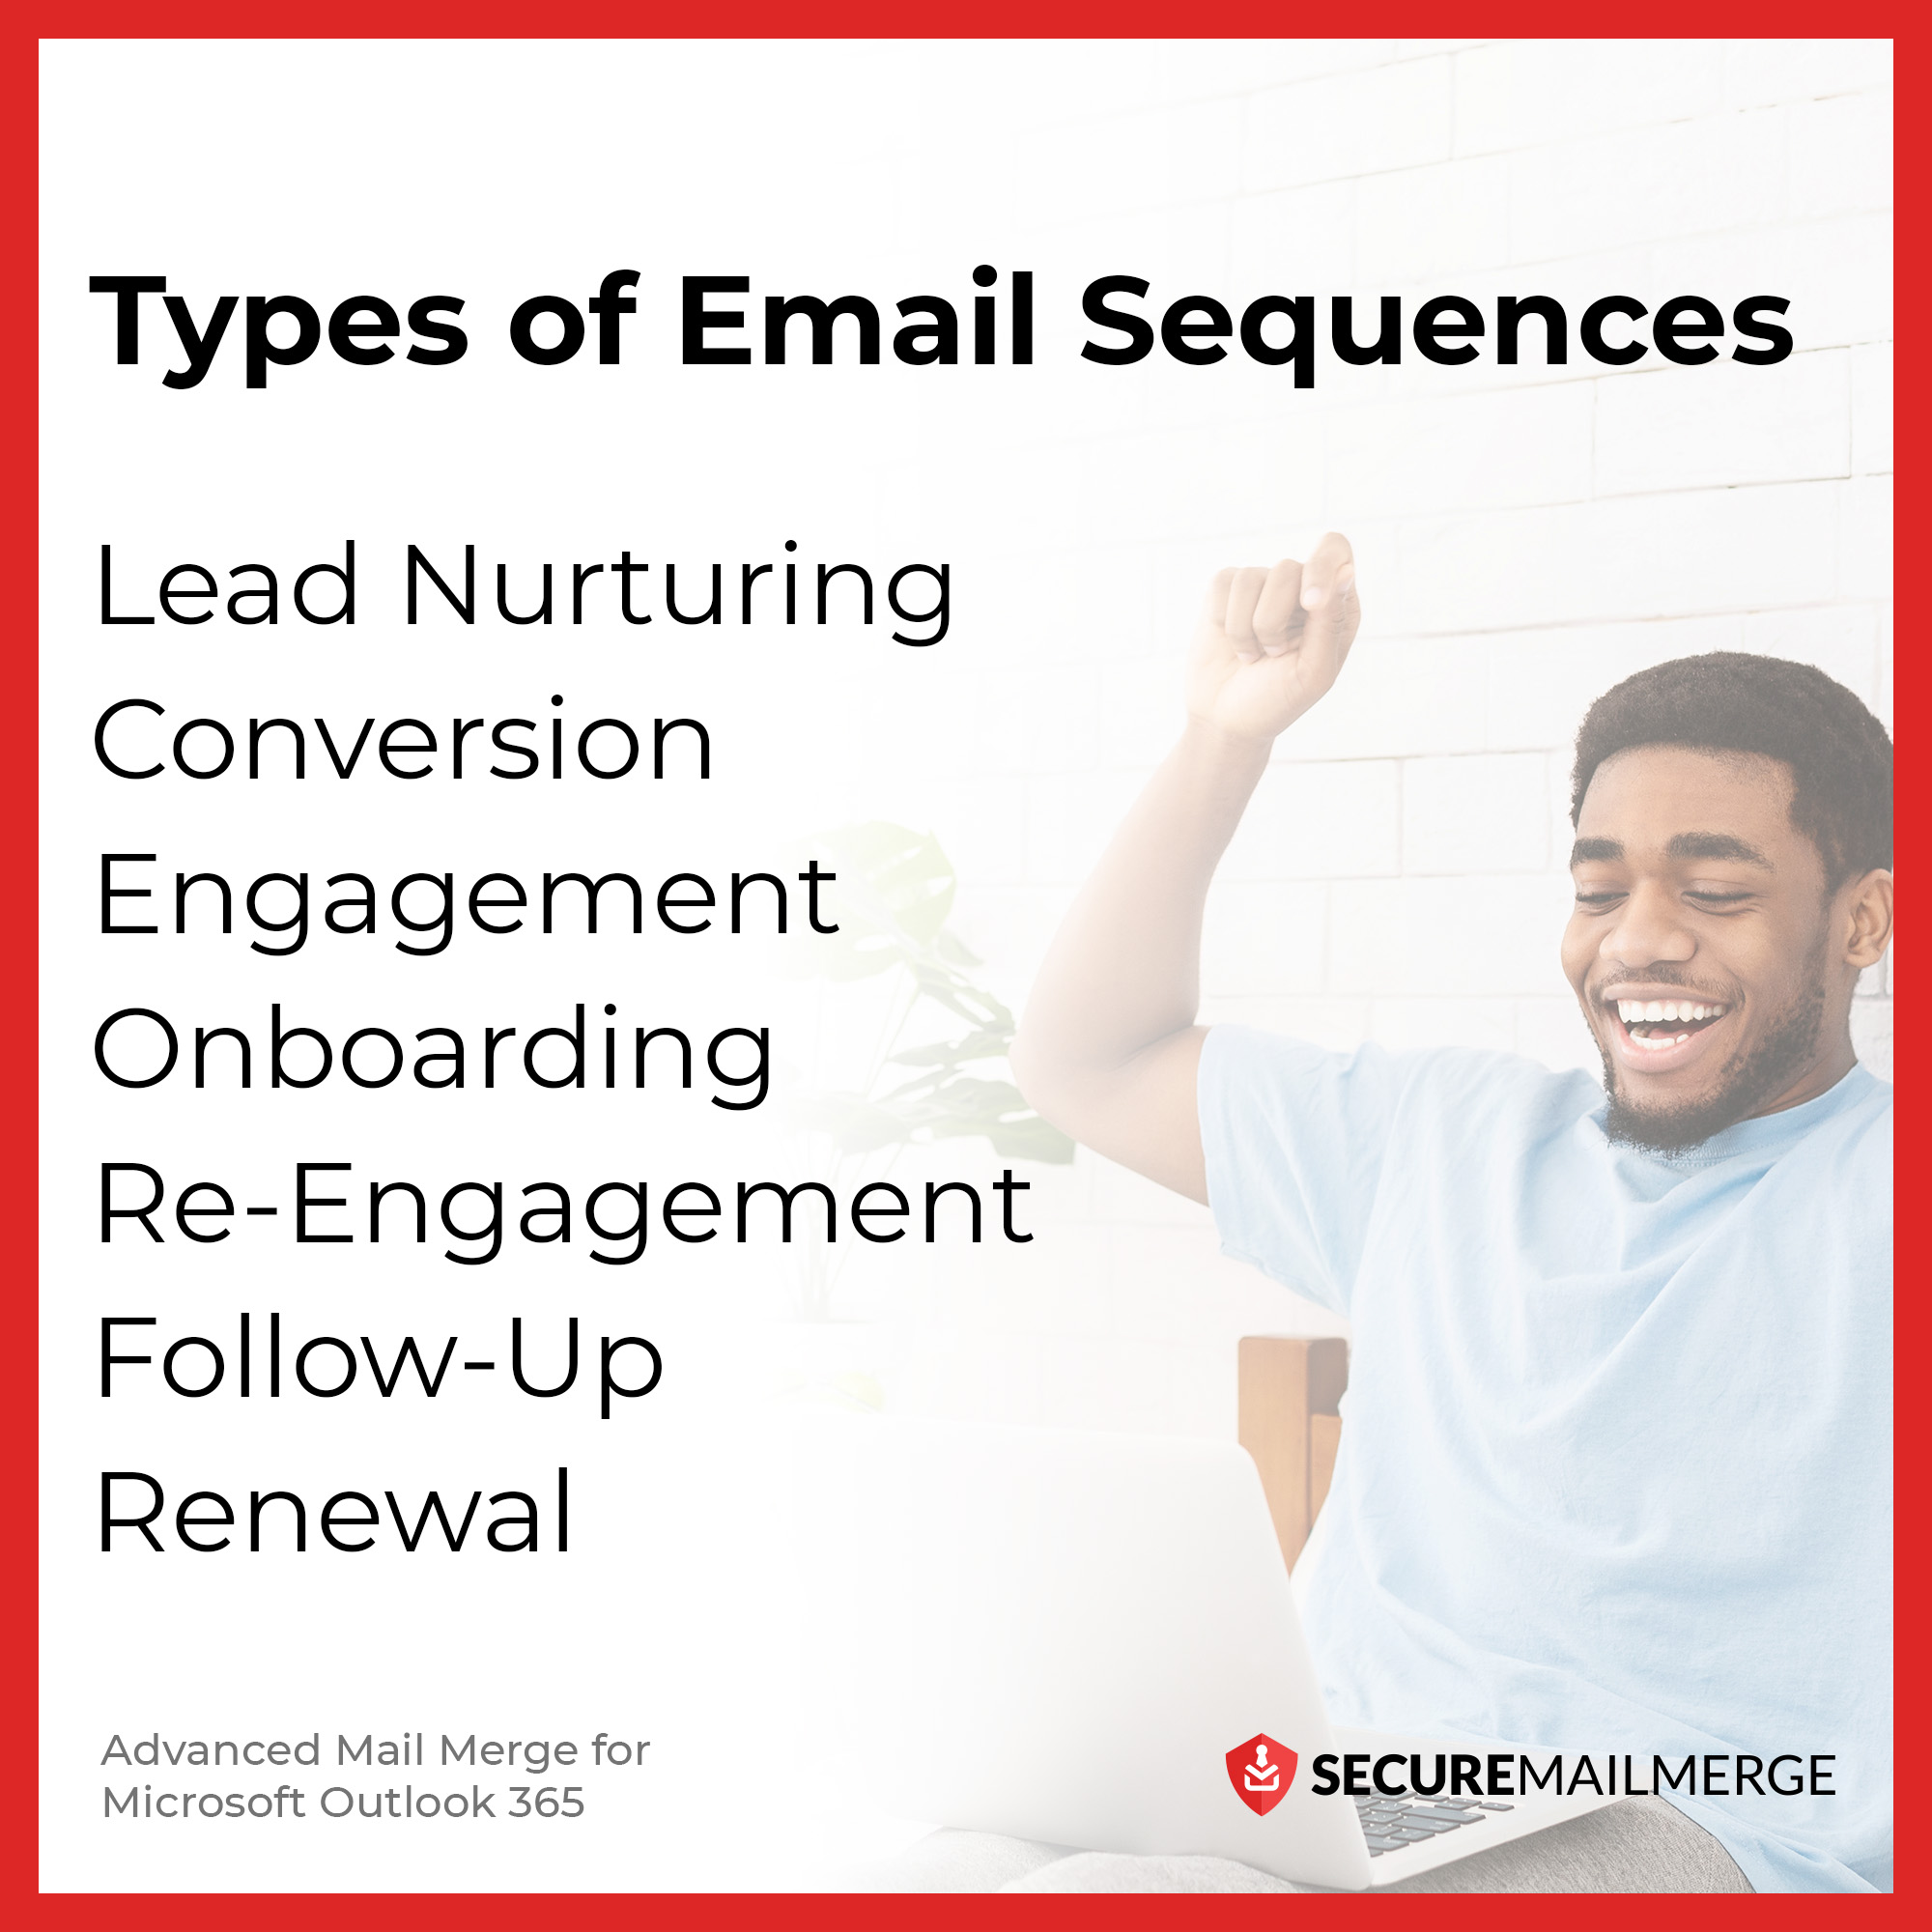 Types of Email Sequences